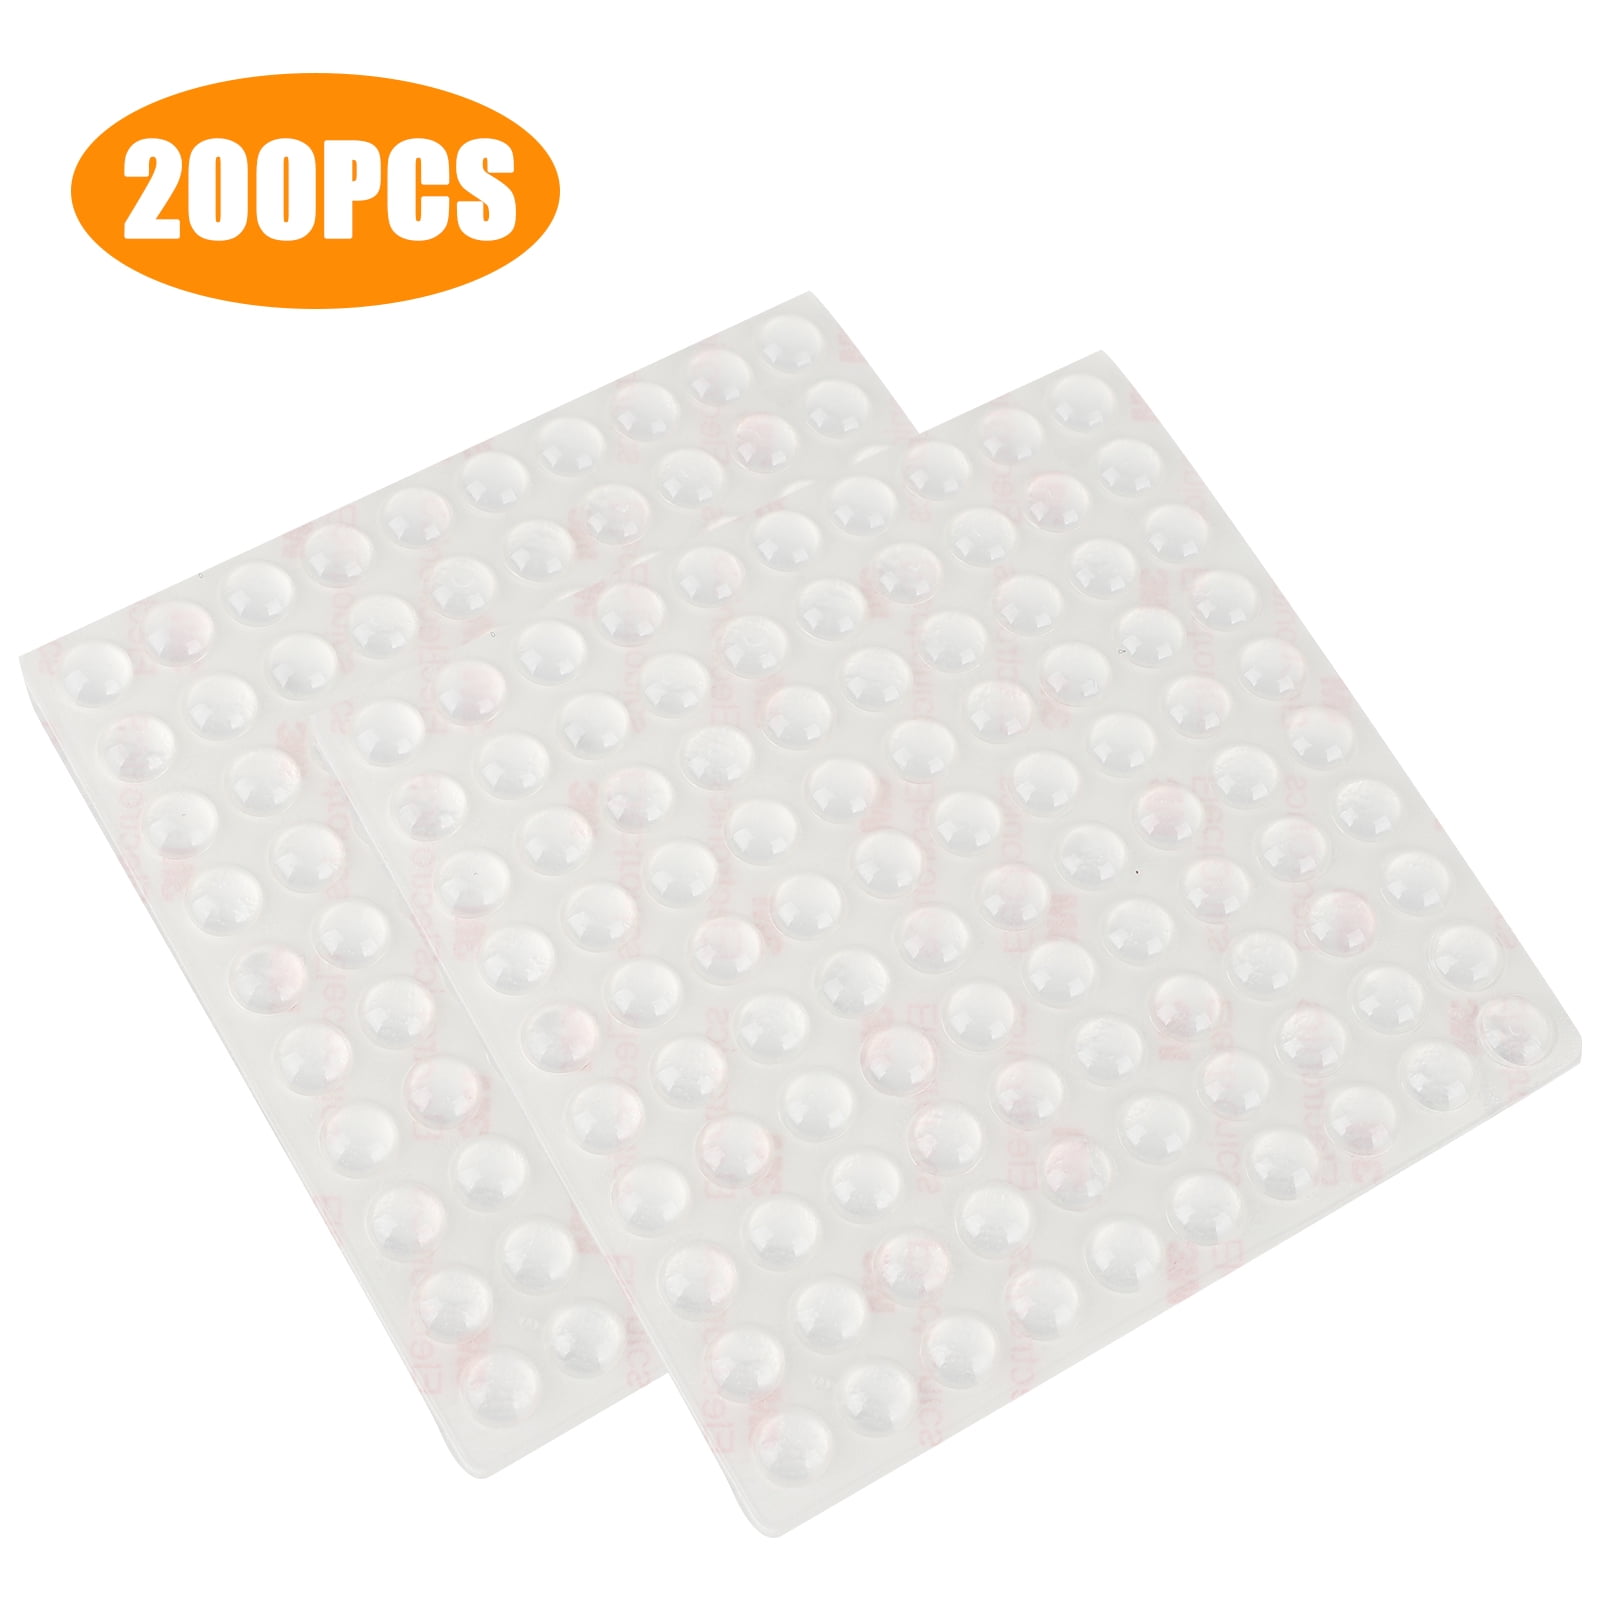 100pc 1/2" Diameter Clear Self-Adhesive Rubber Bumper Pad Wood Glass Surface 